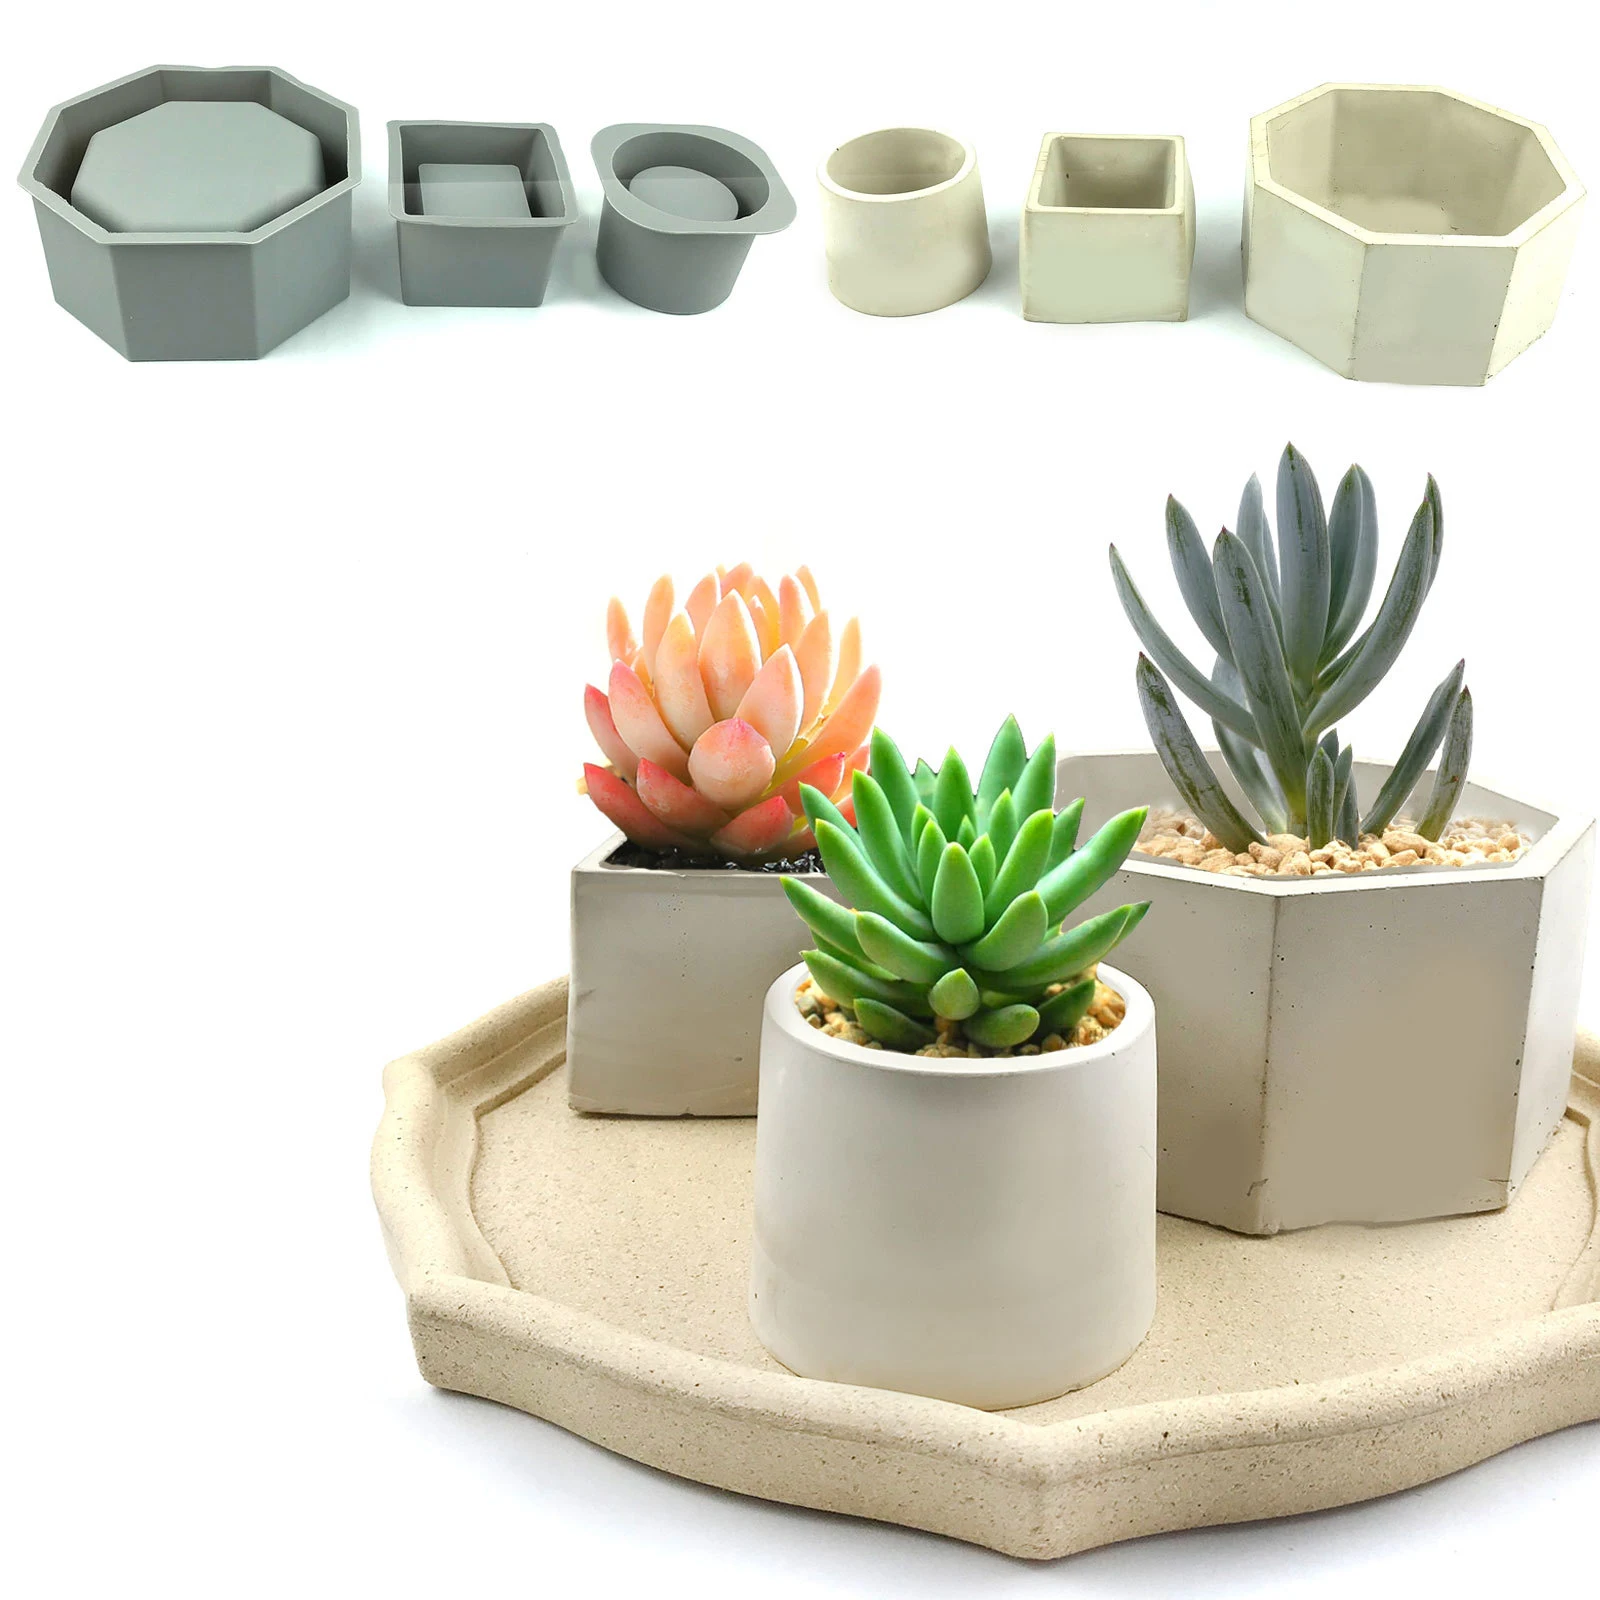 

Silicone Molds For Concrete Flower Pot,Cement Molds Succulent Plants Pot Mold Concrete Planters Moulds Diy Aromatherapy Plaster